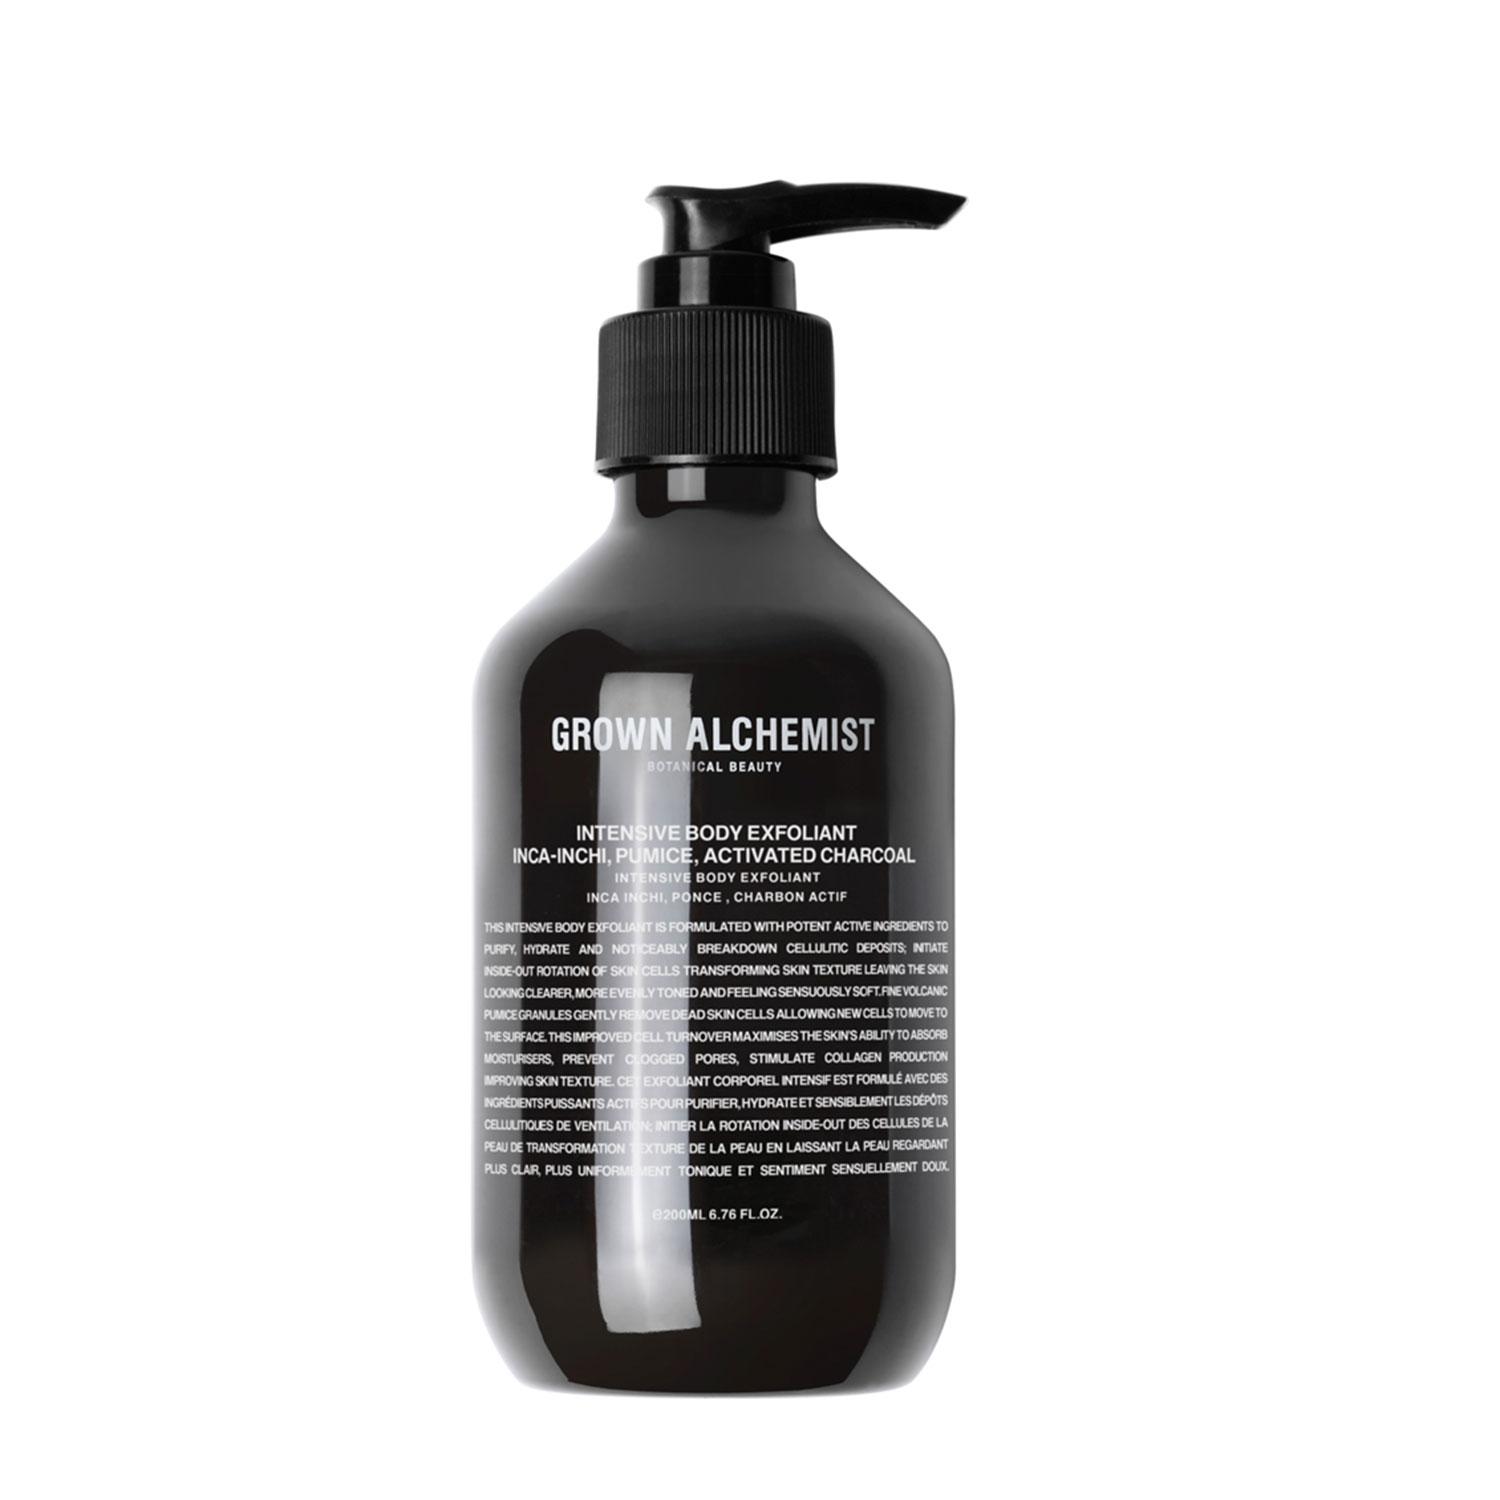 GROWN Beauty - Intensive Body Exfoliant: Inca-Inchi, Pumice, Activated Charcoal